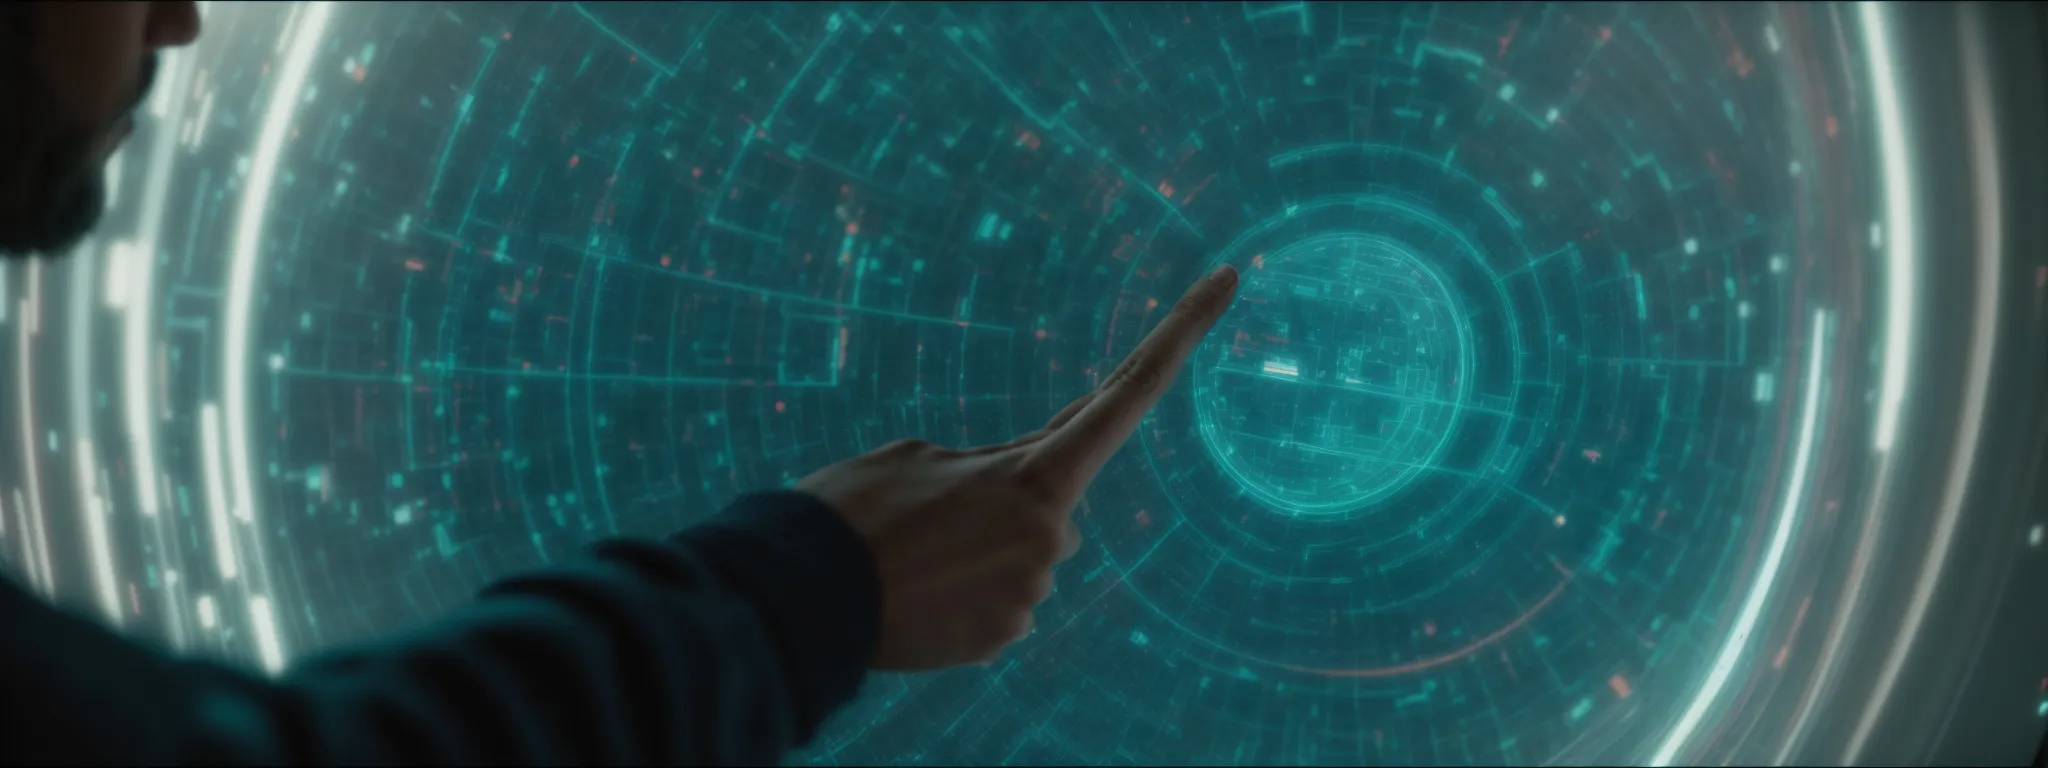 a person interacts with a futuristic holographic touch interface representing advanced search technology.